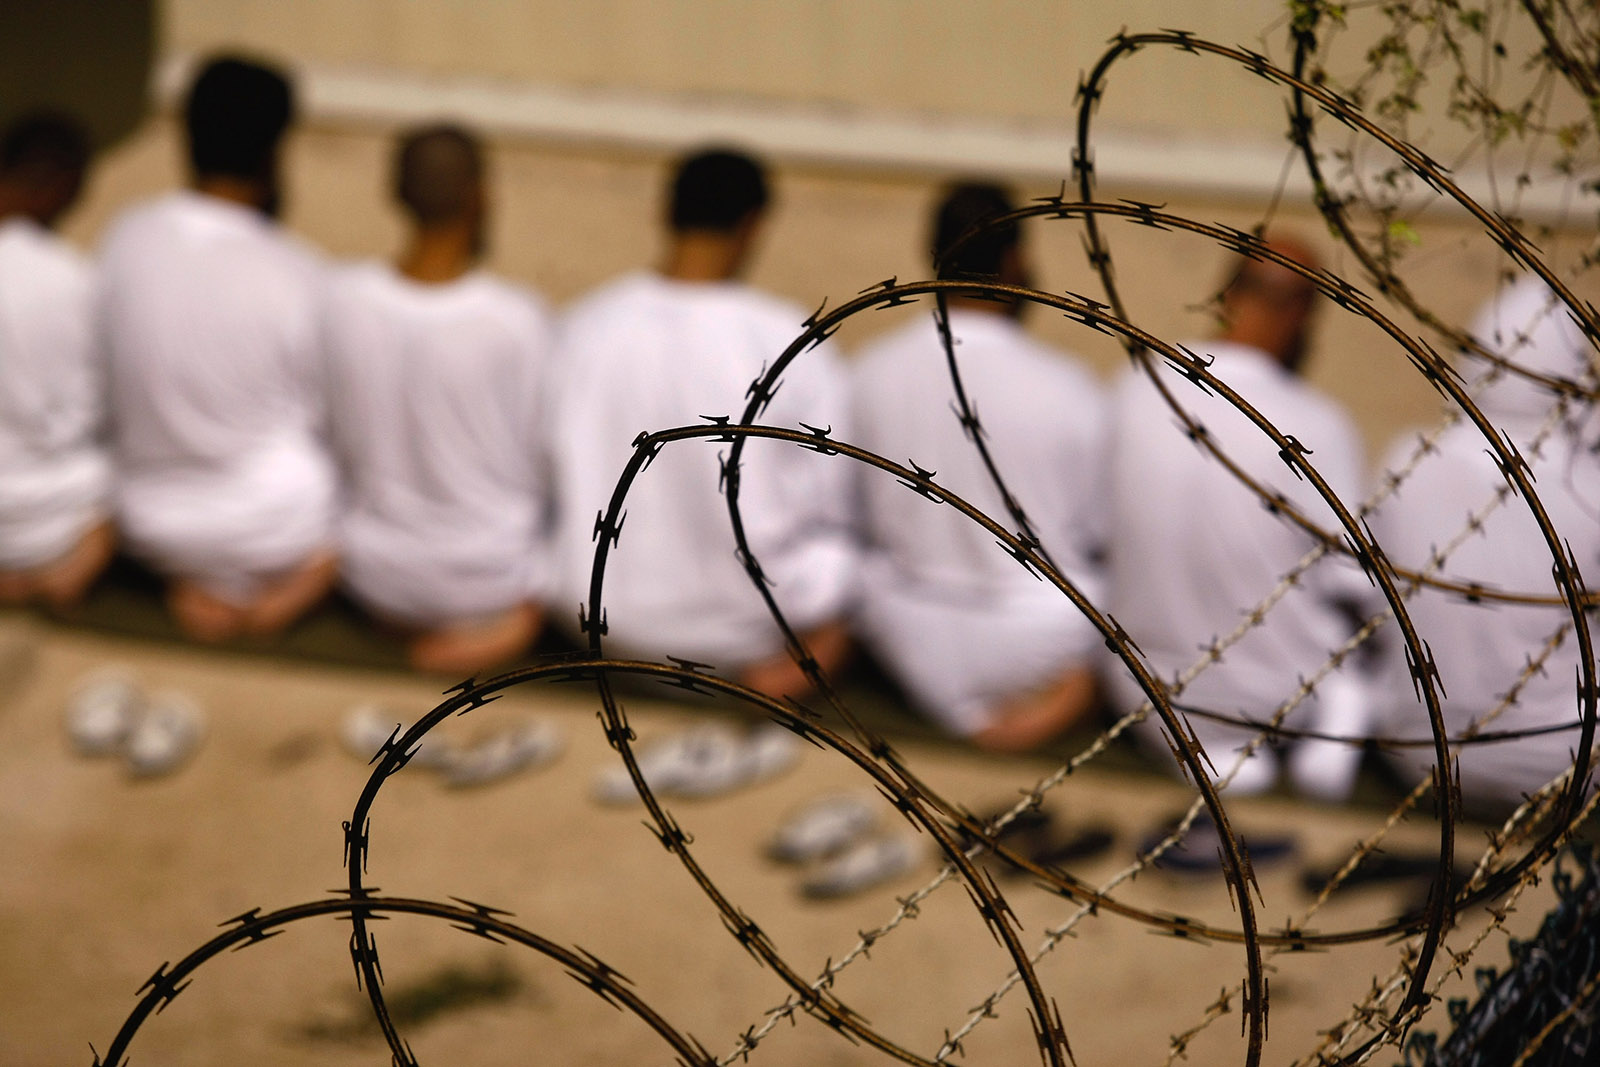 A group of detainees kneeling in prayer in the US prison camp at Guantánamo Bay, Cuba, October 28, 2009